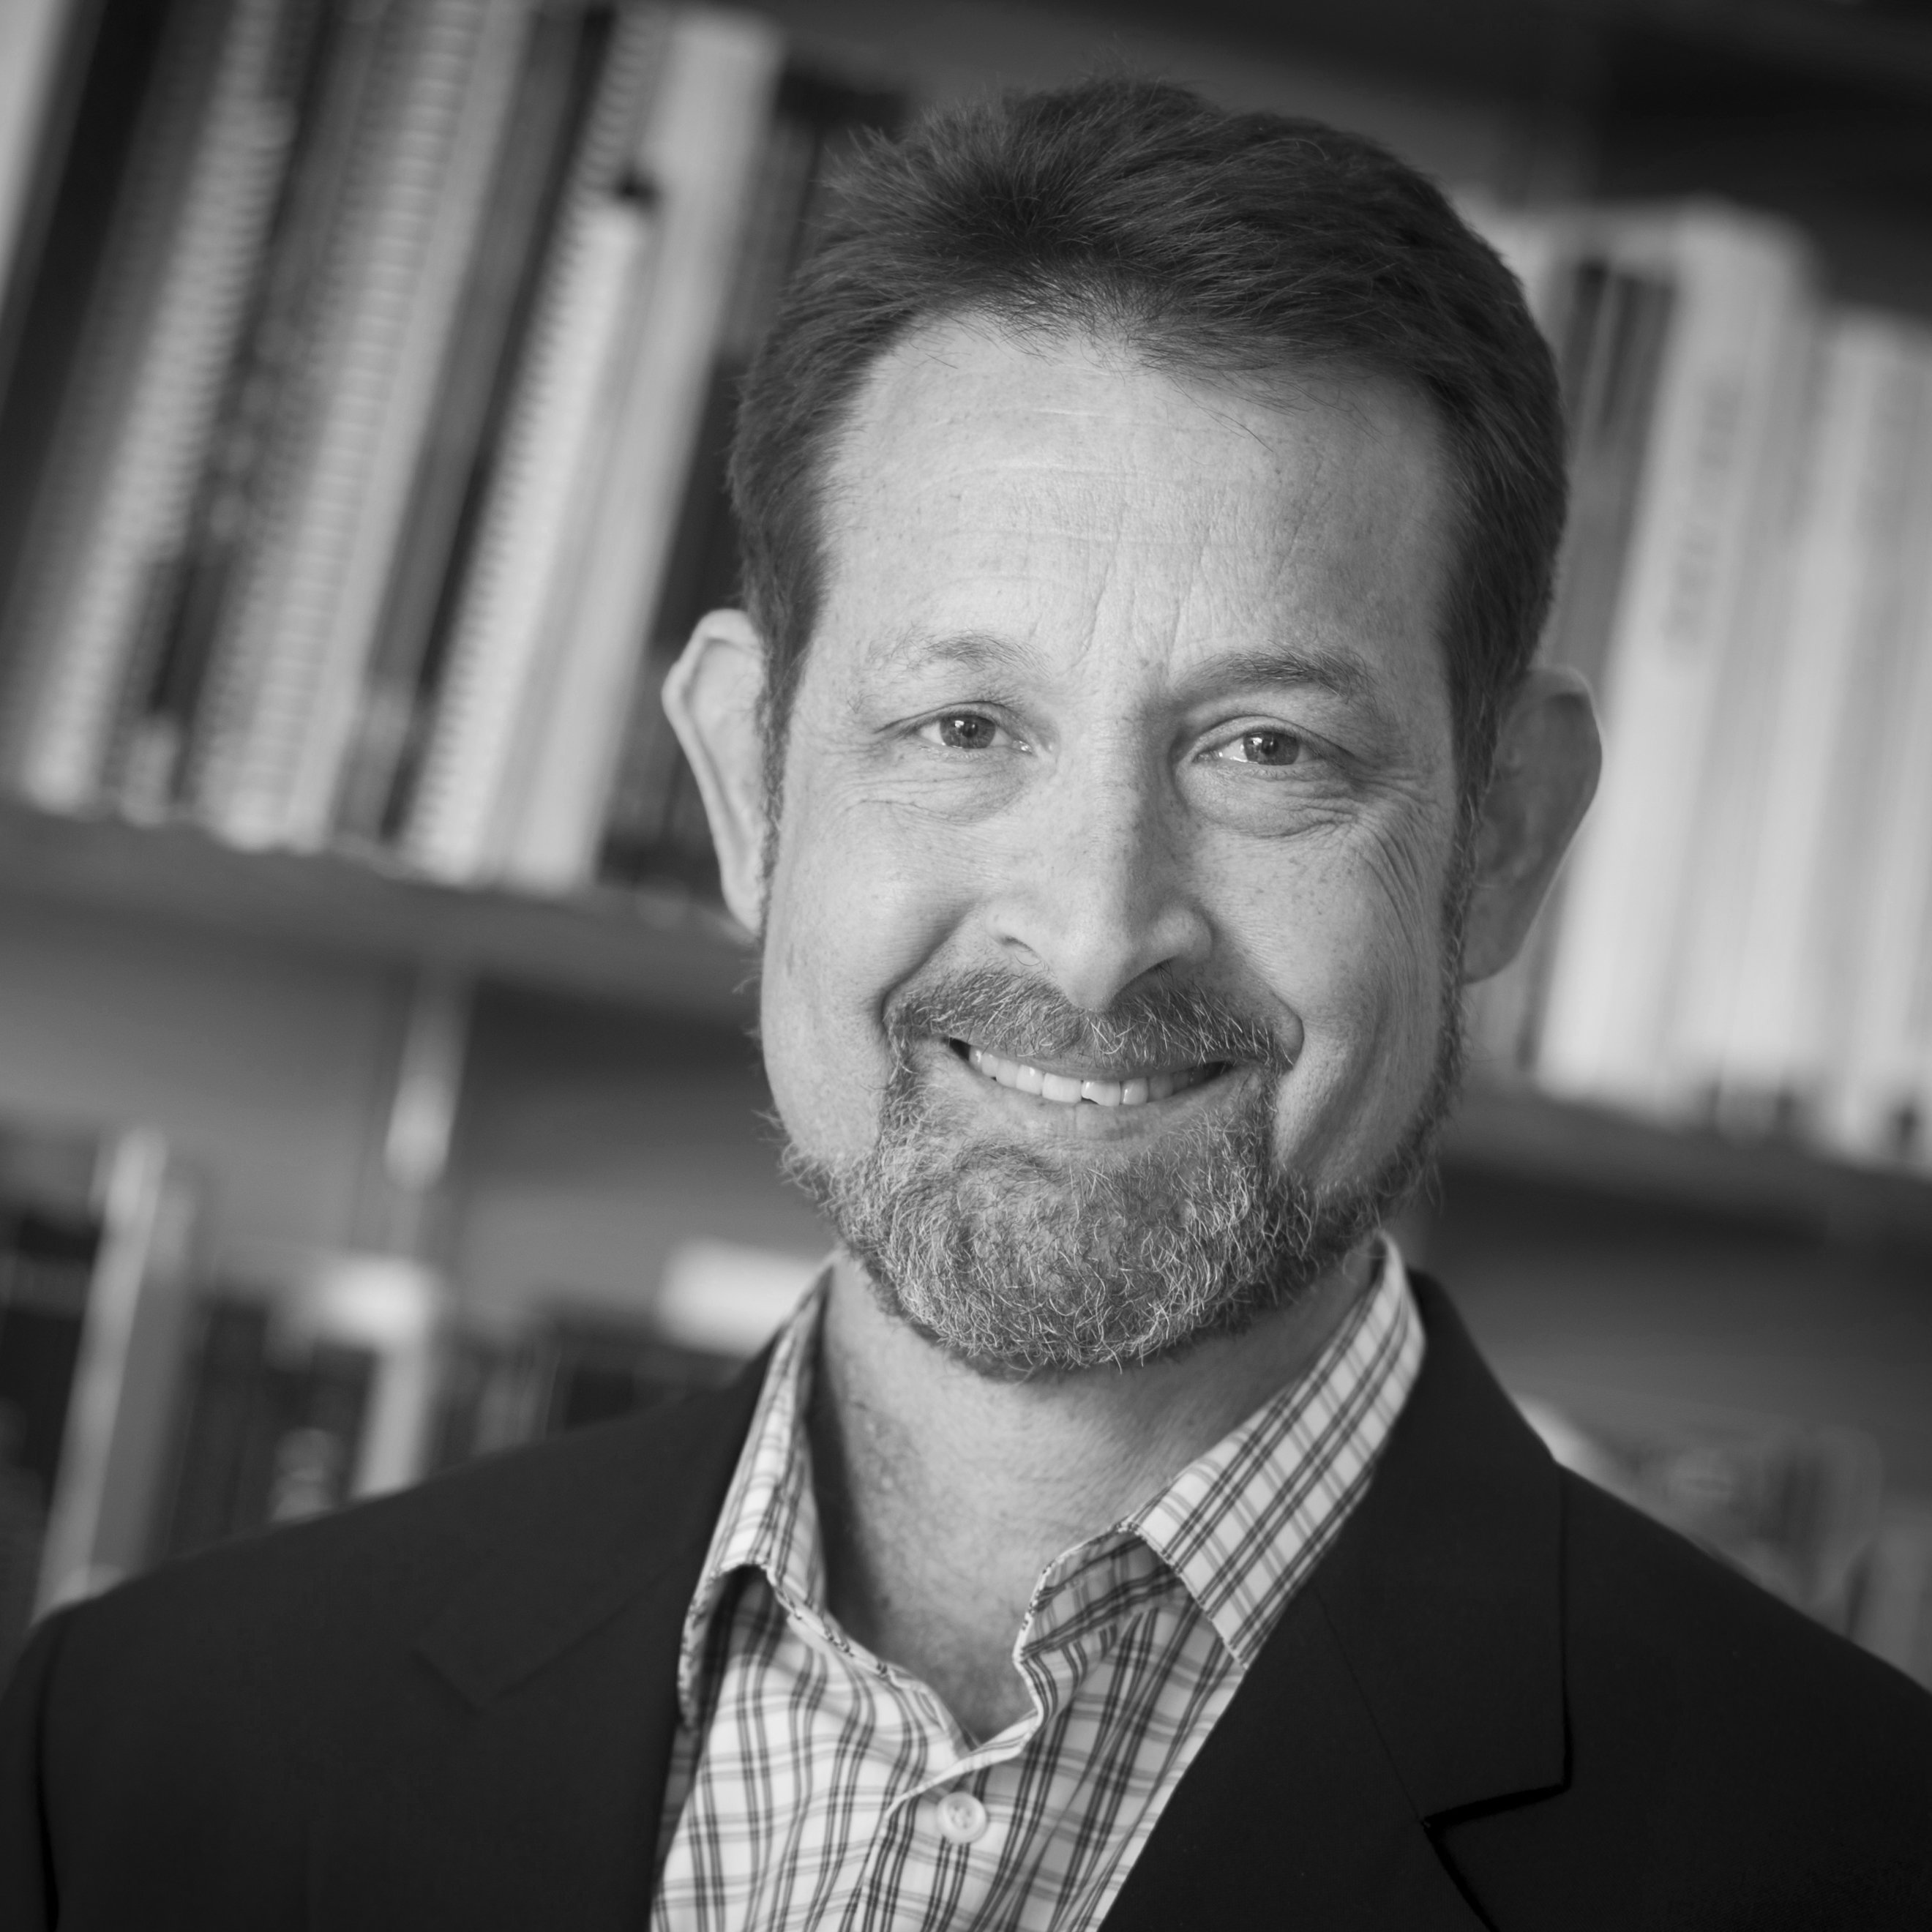 Professor Andrew Weiner of Purdue University to deliver the 2015 Hermann Anton Haus Lecture: Lecture series honoring Haus brings eminent visitors to MIT